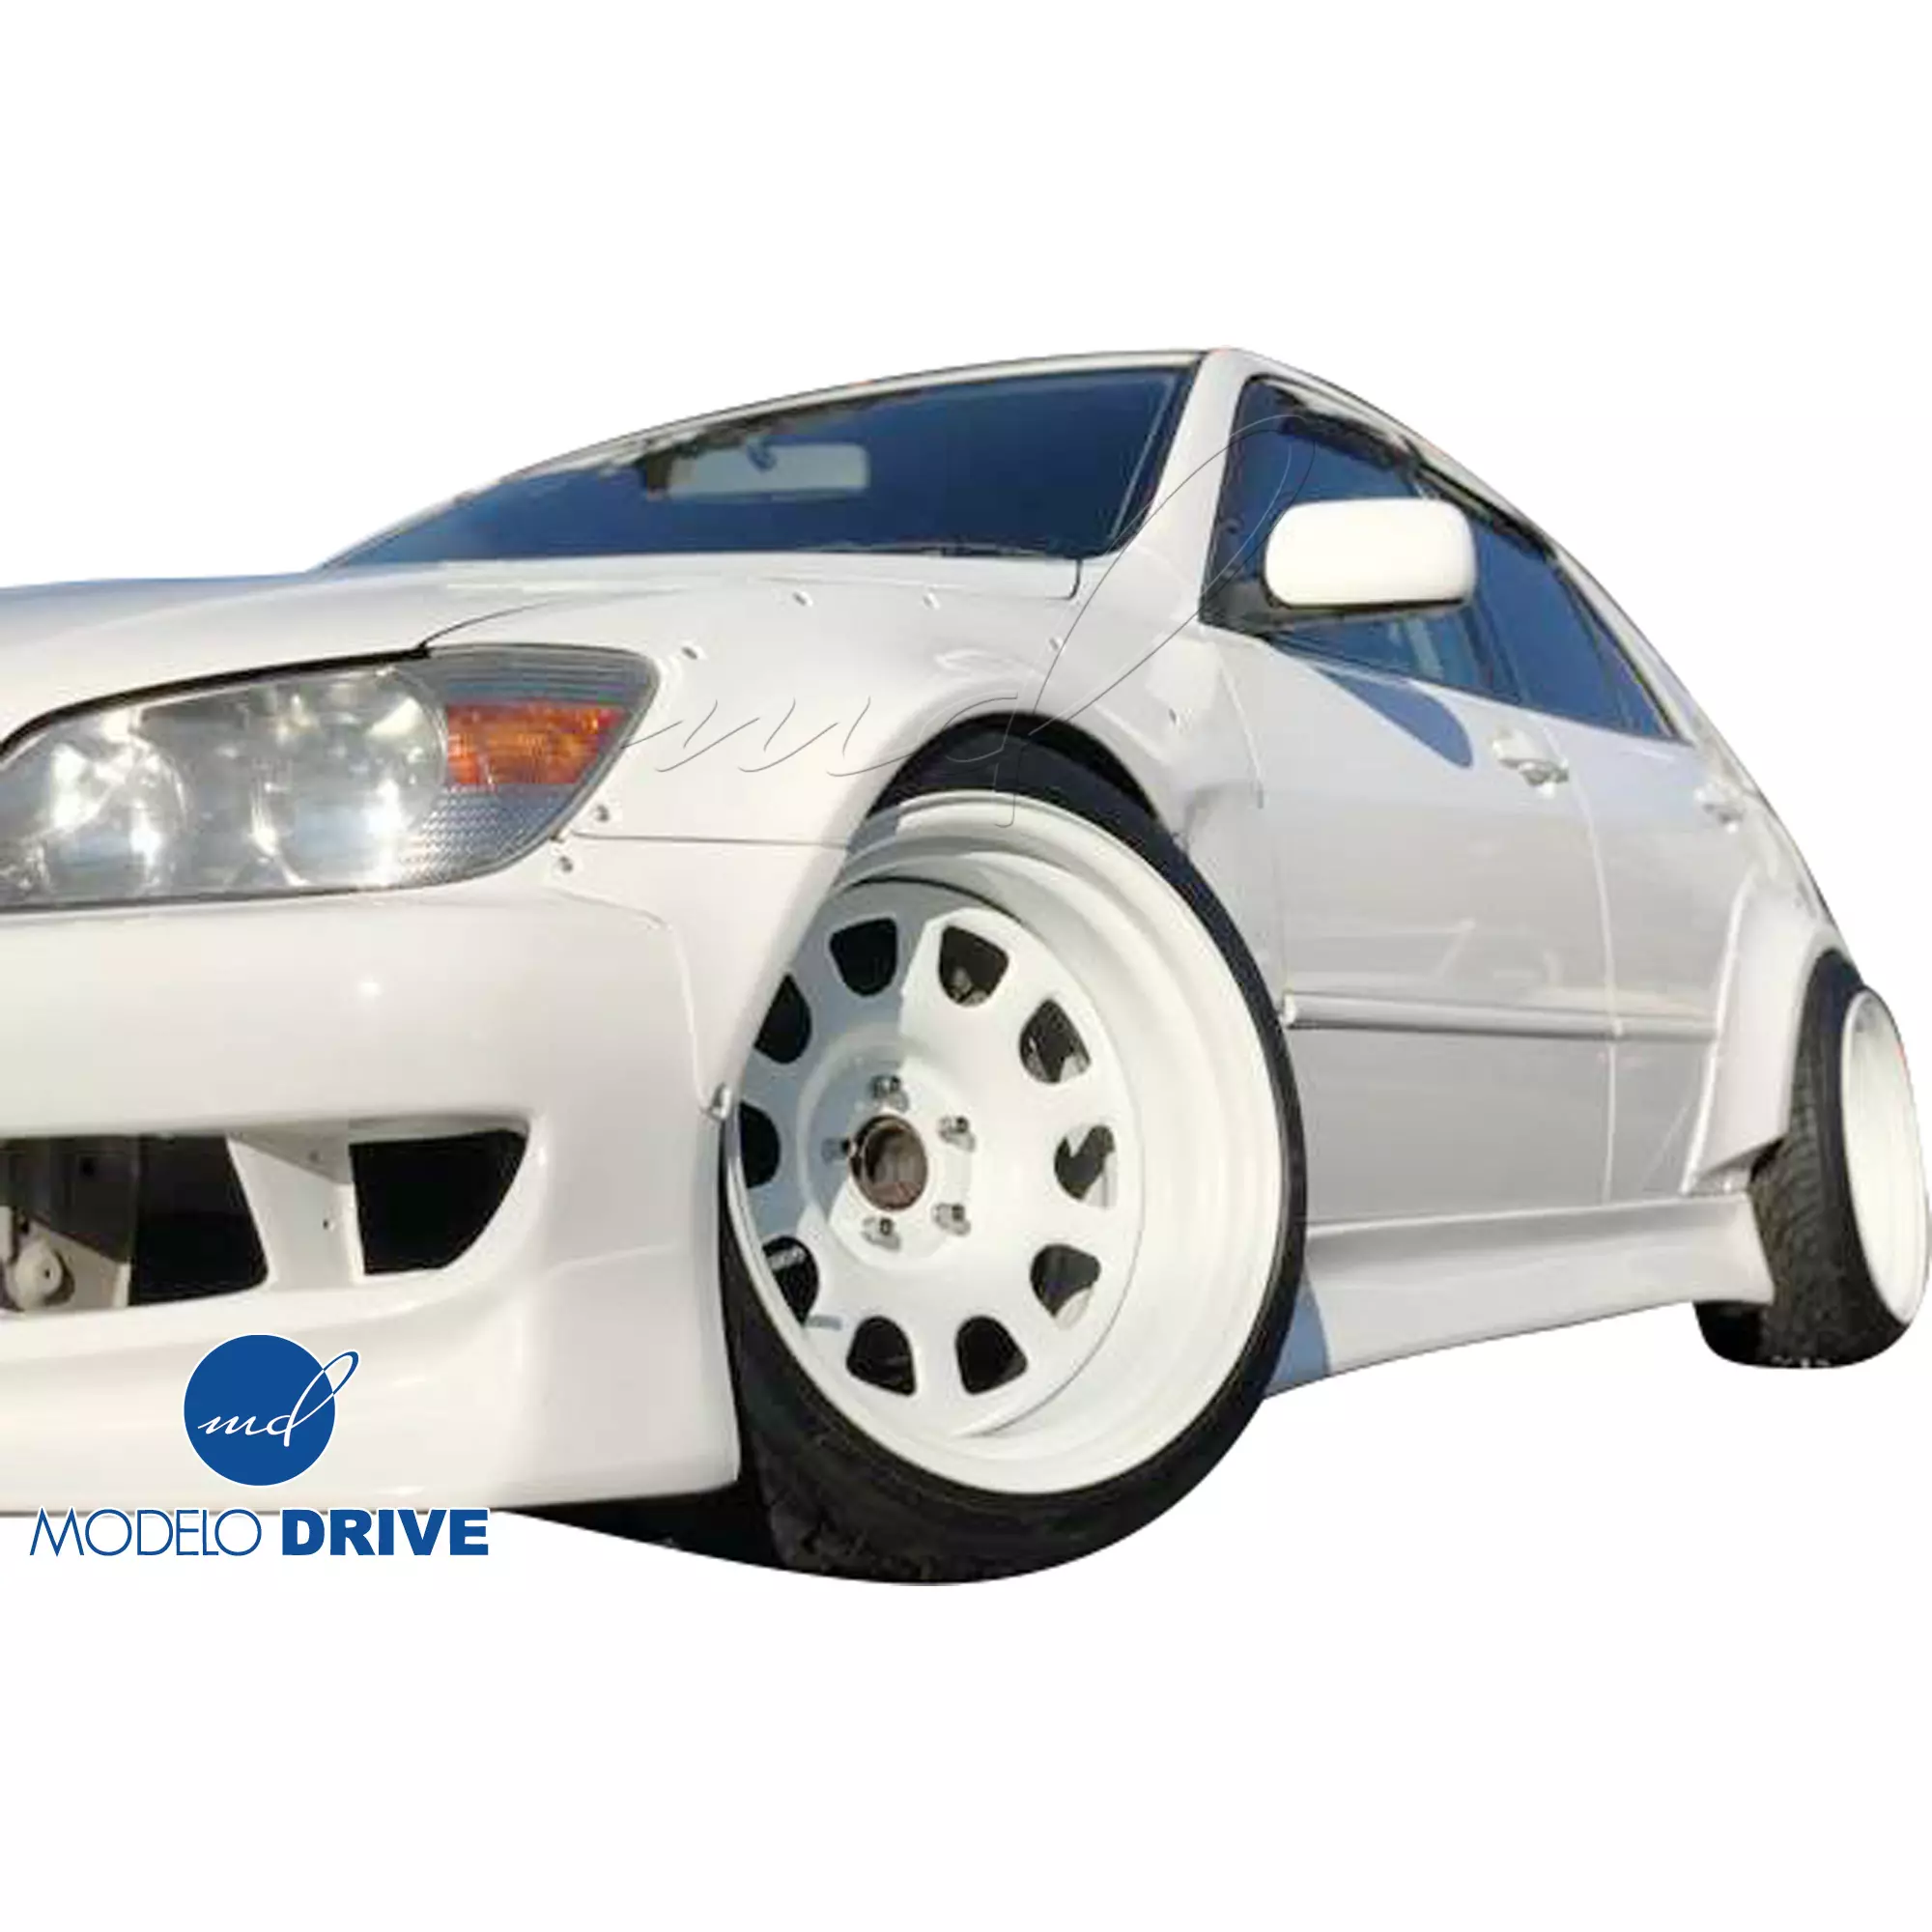 ModeloDrive FRP MSV Wide Body 40mm Fender Flares (front) 4pc > Lexus IS Series IS300 2000-2005> 4dr - Image 7